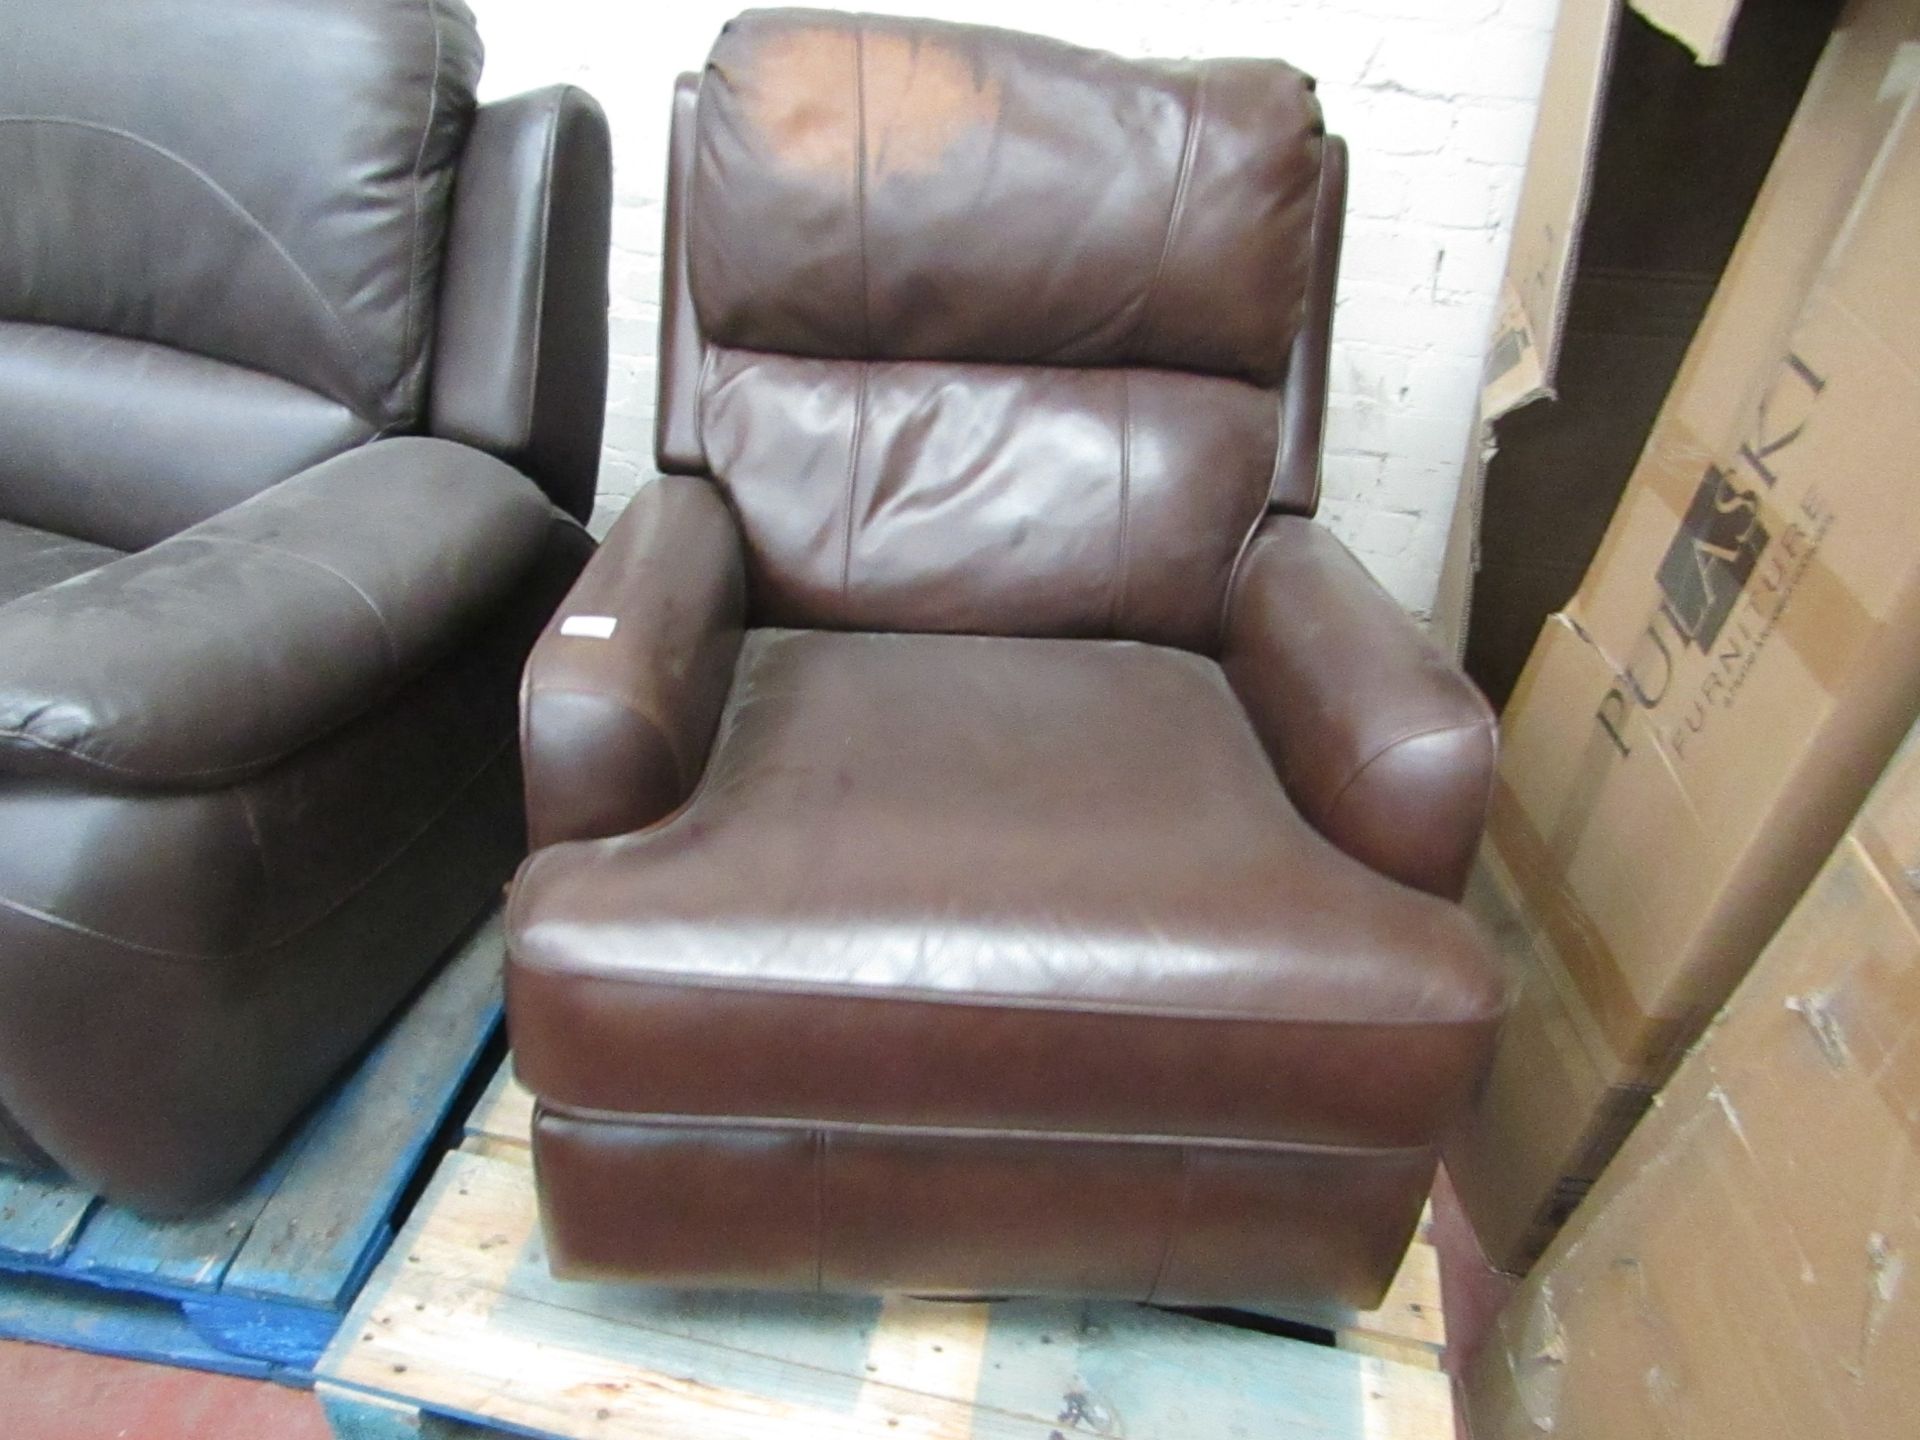 Rocking Swivel manual reclining Arm chair, tested working but has a discoloured patch on the head